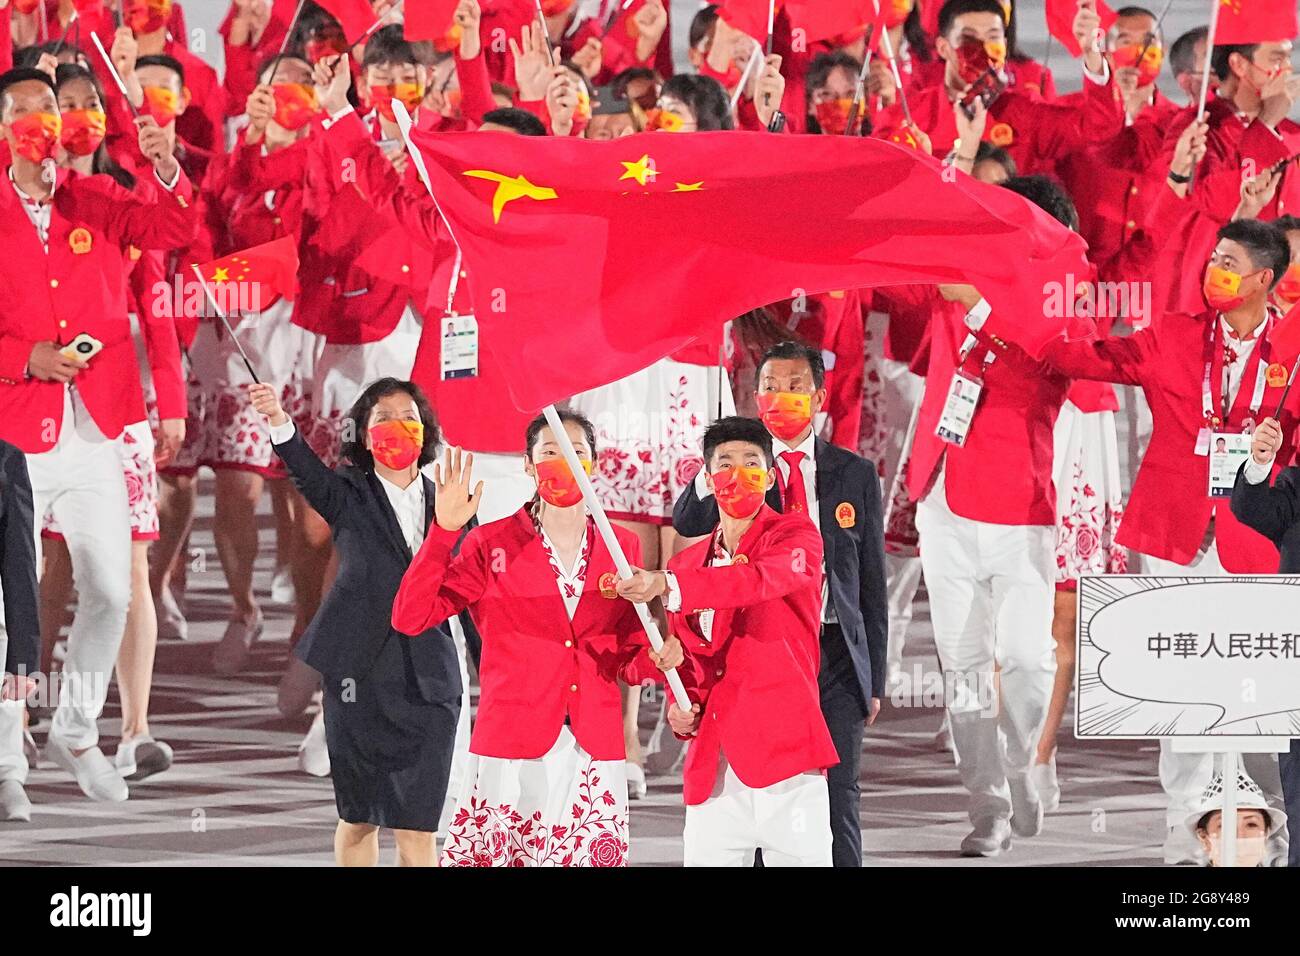 Tokyo, Japan. 23rd July, 2021. Olympics: Opening ceremony at the Olympic Stadium. The team from China with the flag bearers volleyball player Ting Zhu and taekwondo fighter Shuai Zhao comes into the stadium. Credit: Michael Kappeler/dpa/Alamy Live News Stock Photo